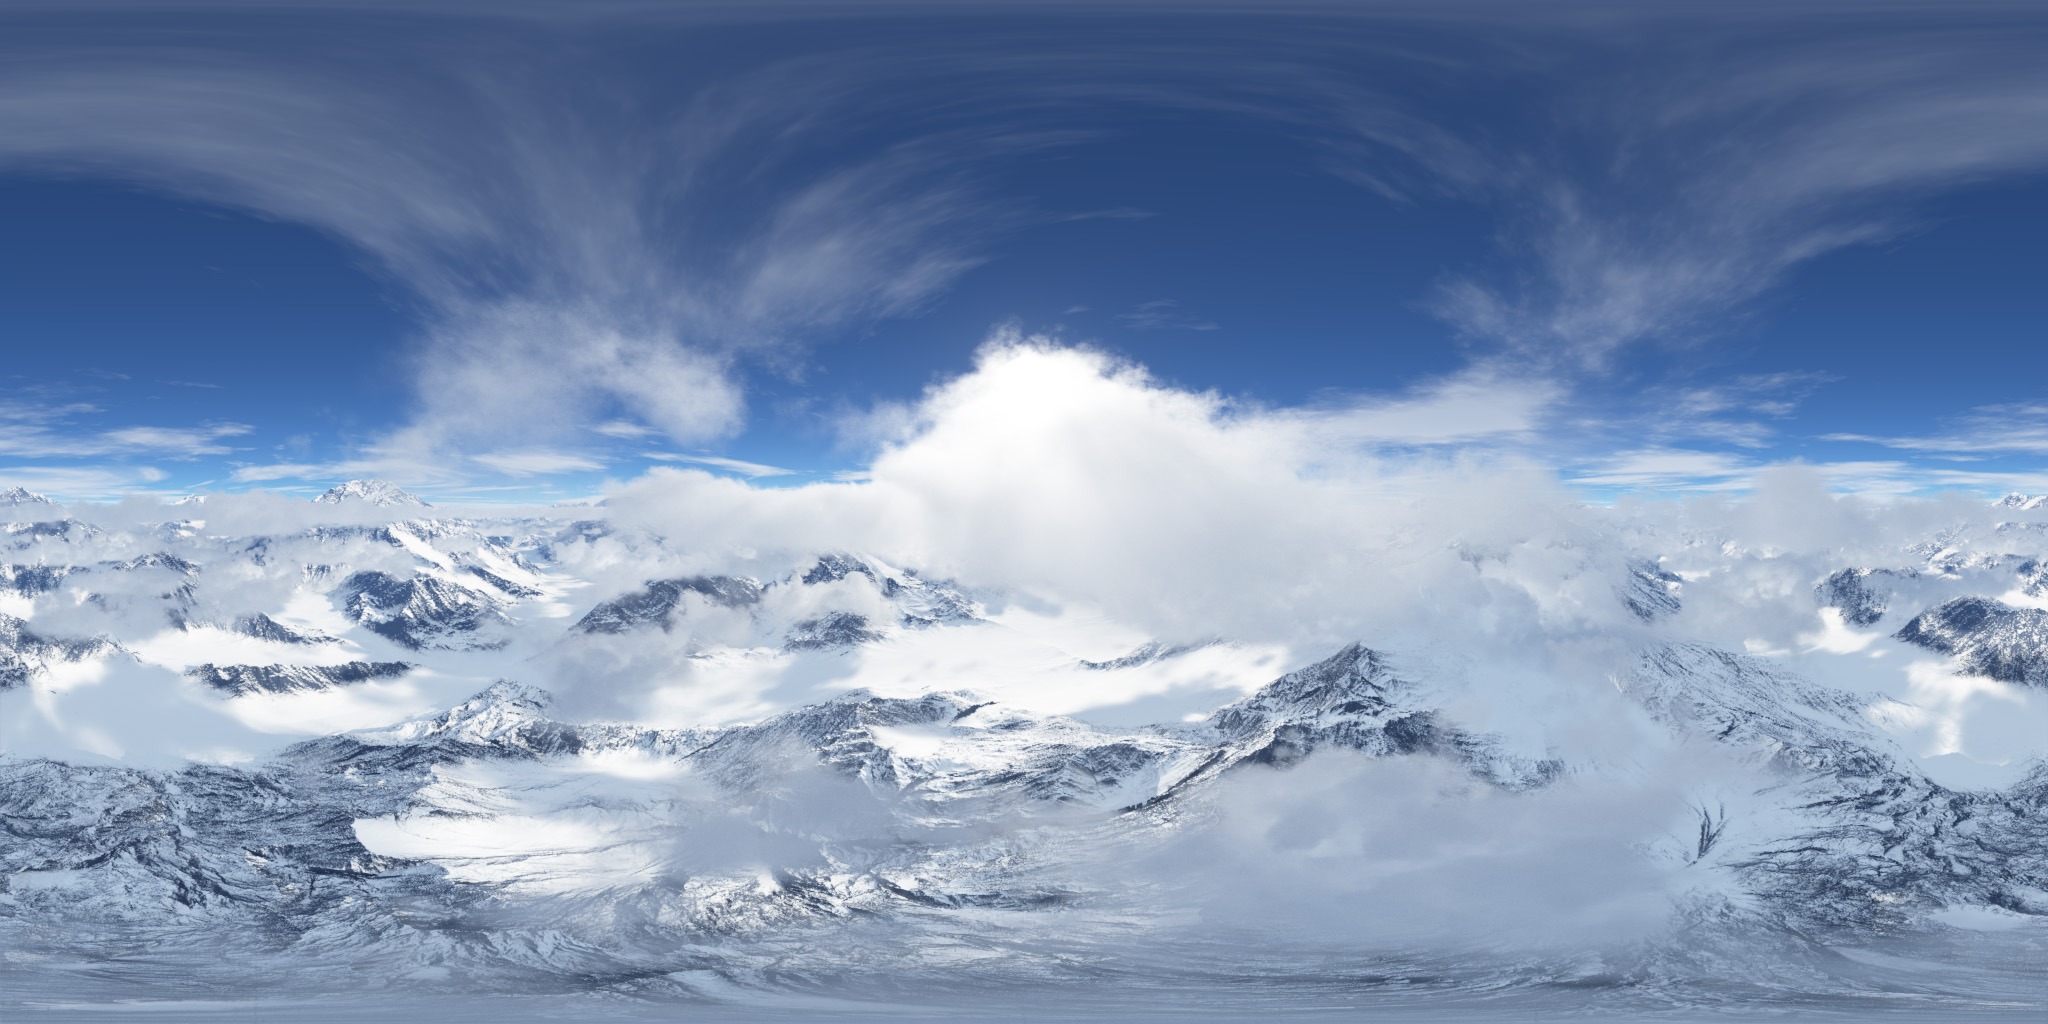 Over the Clouds - Icy Mountain 2.jpg